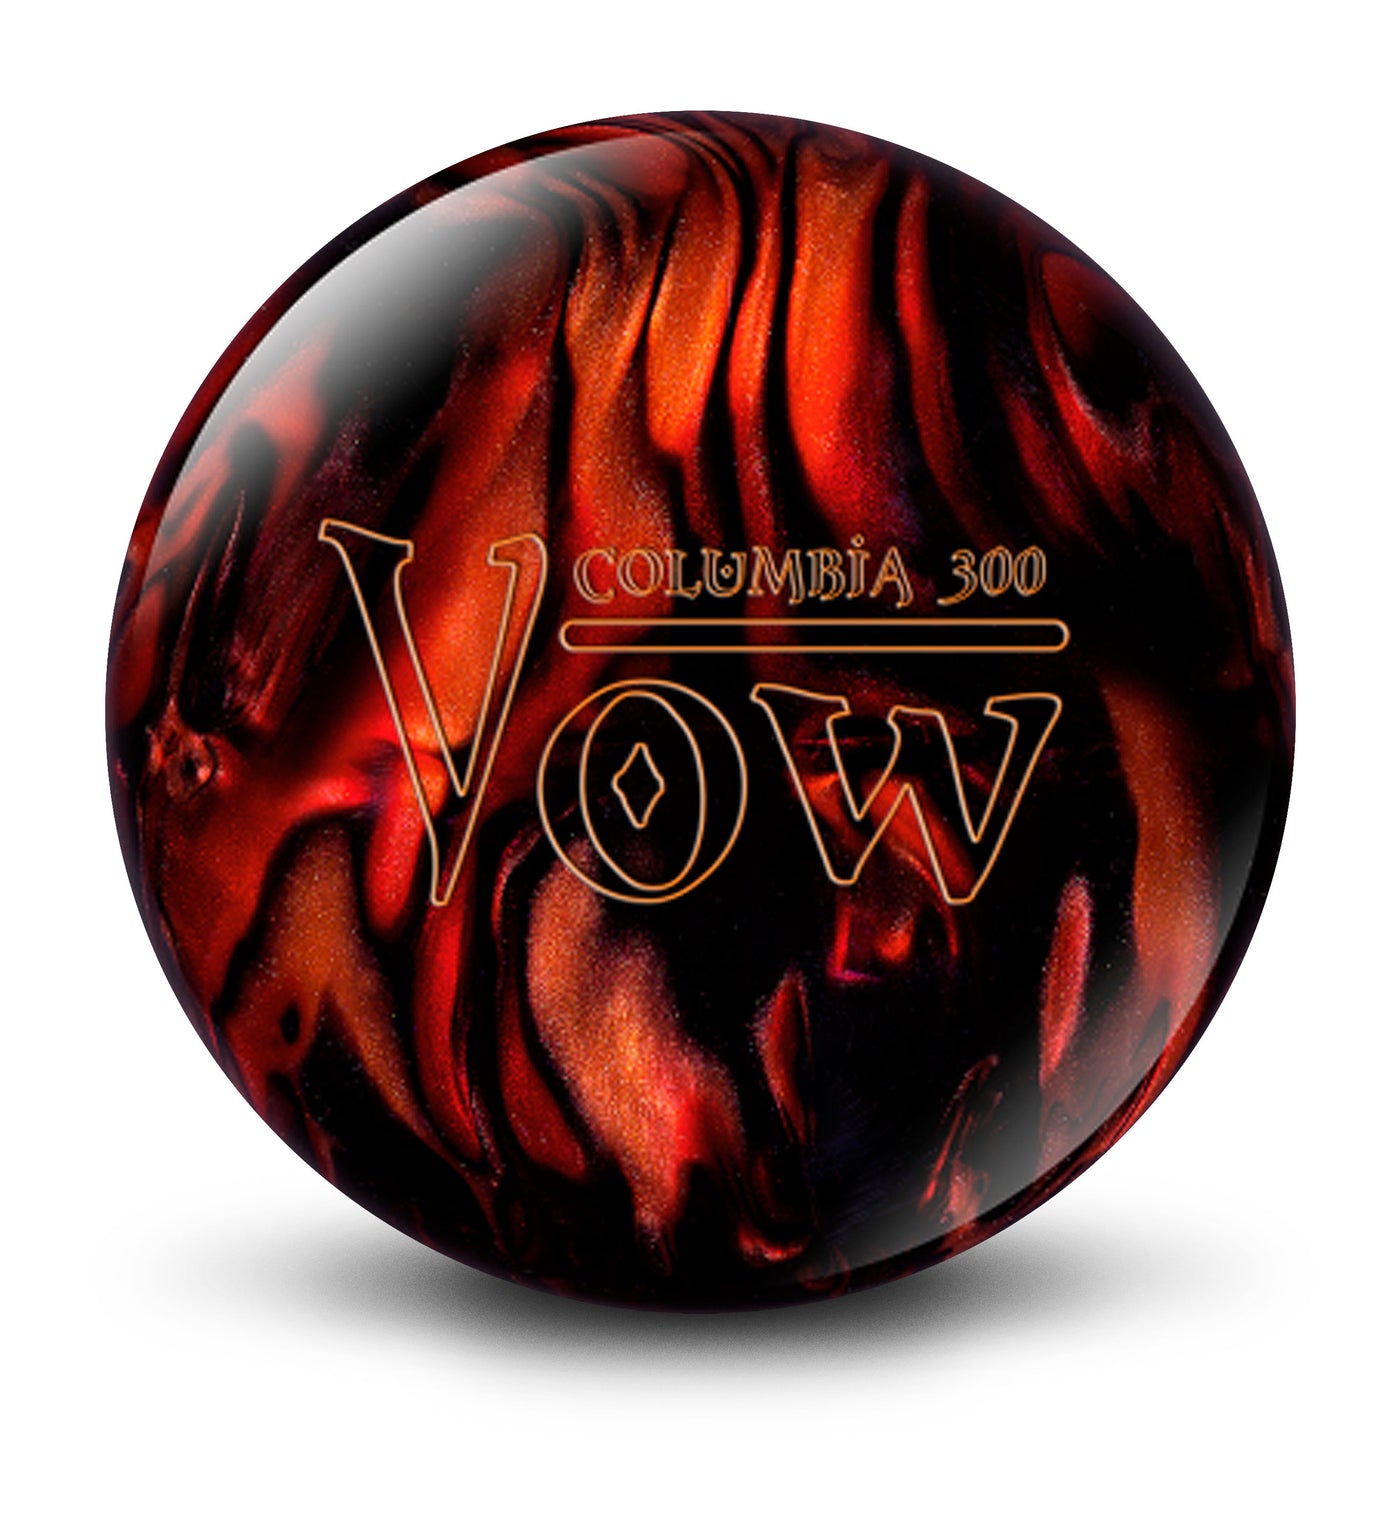 Vow bowling ball